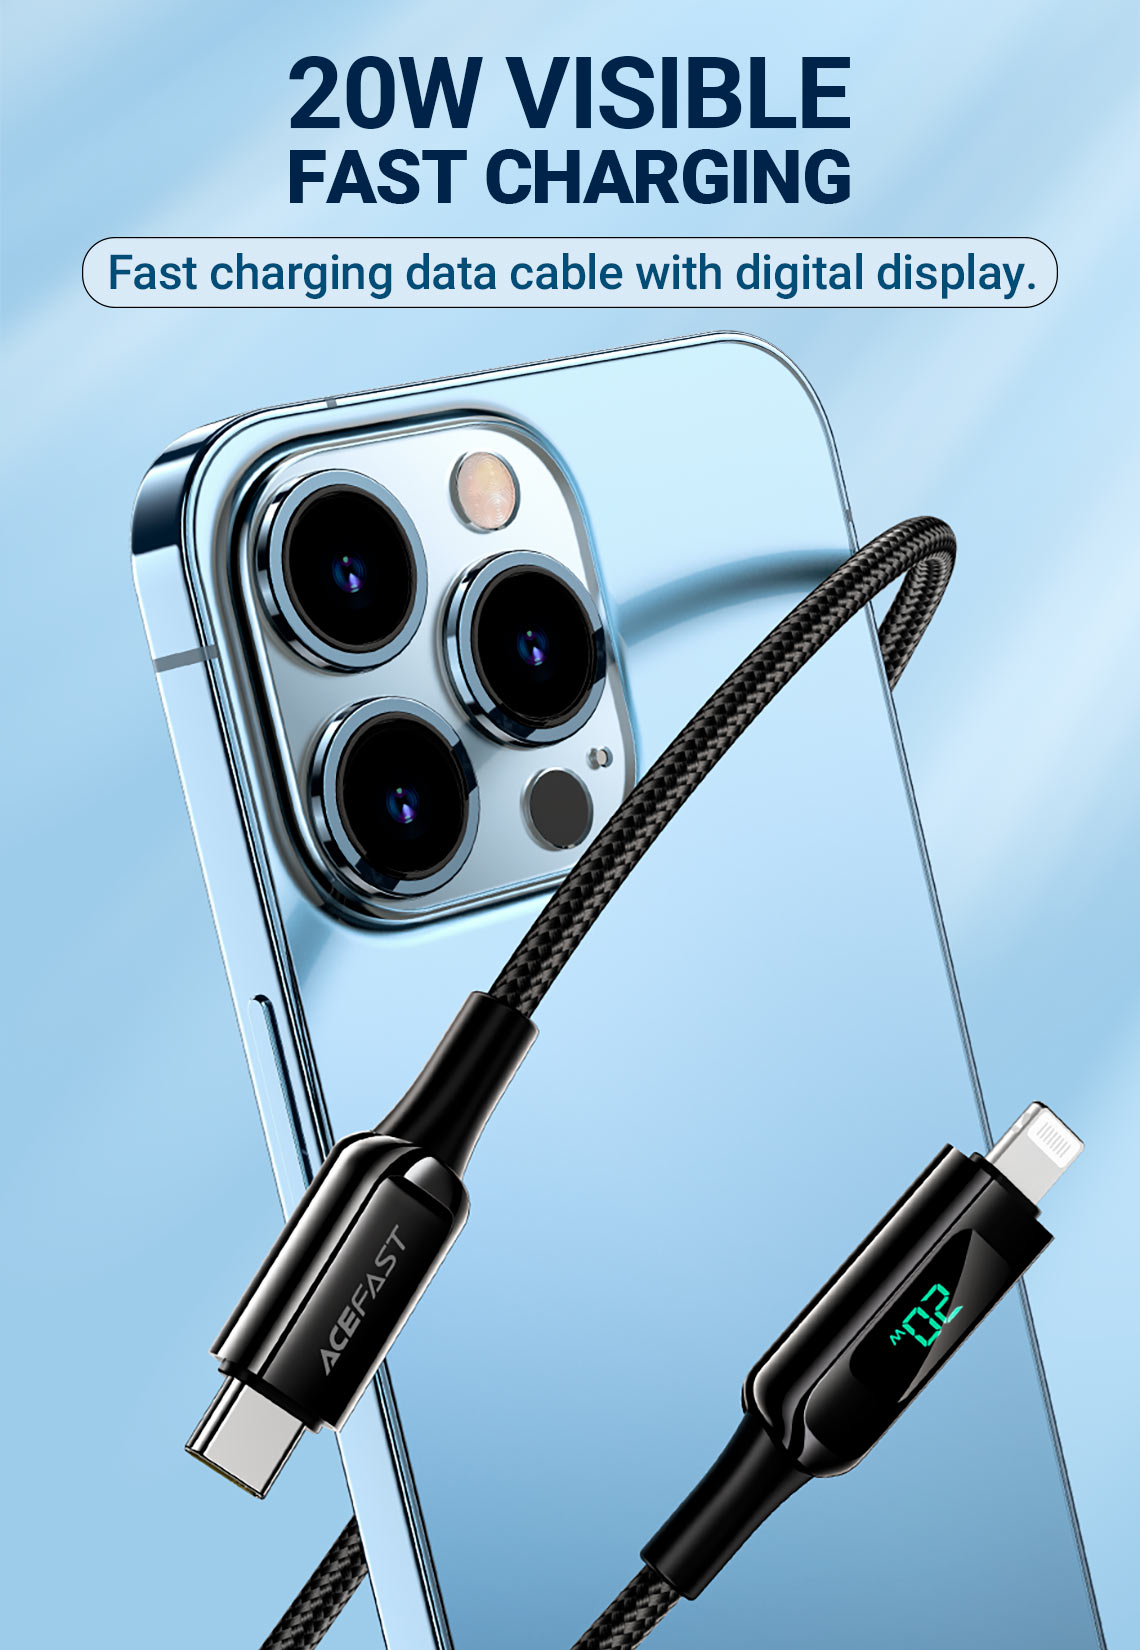 acefast-c6-01-usbc-to-lightning-charging-data-cable-20w-visible-fast-charging